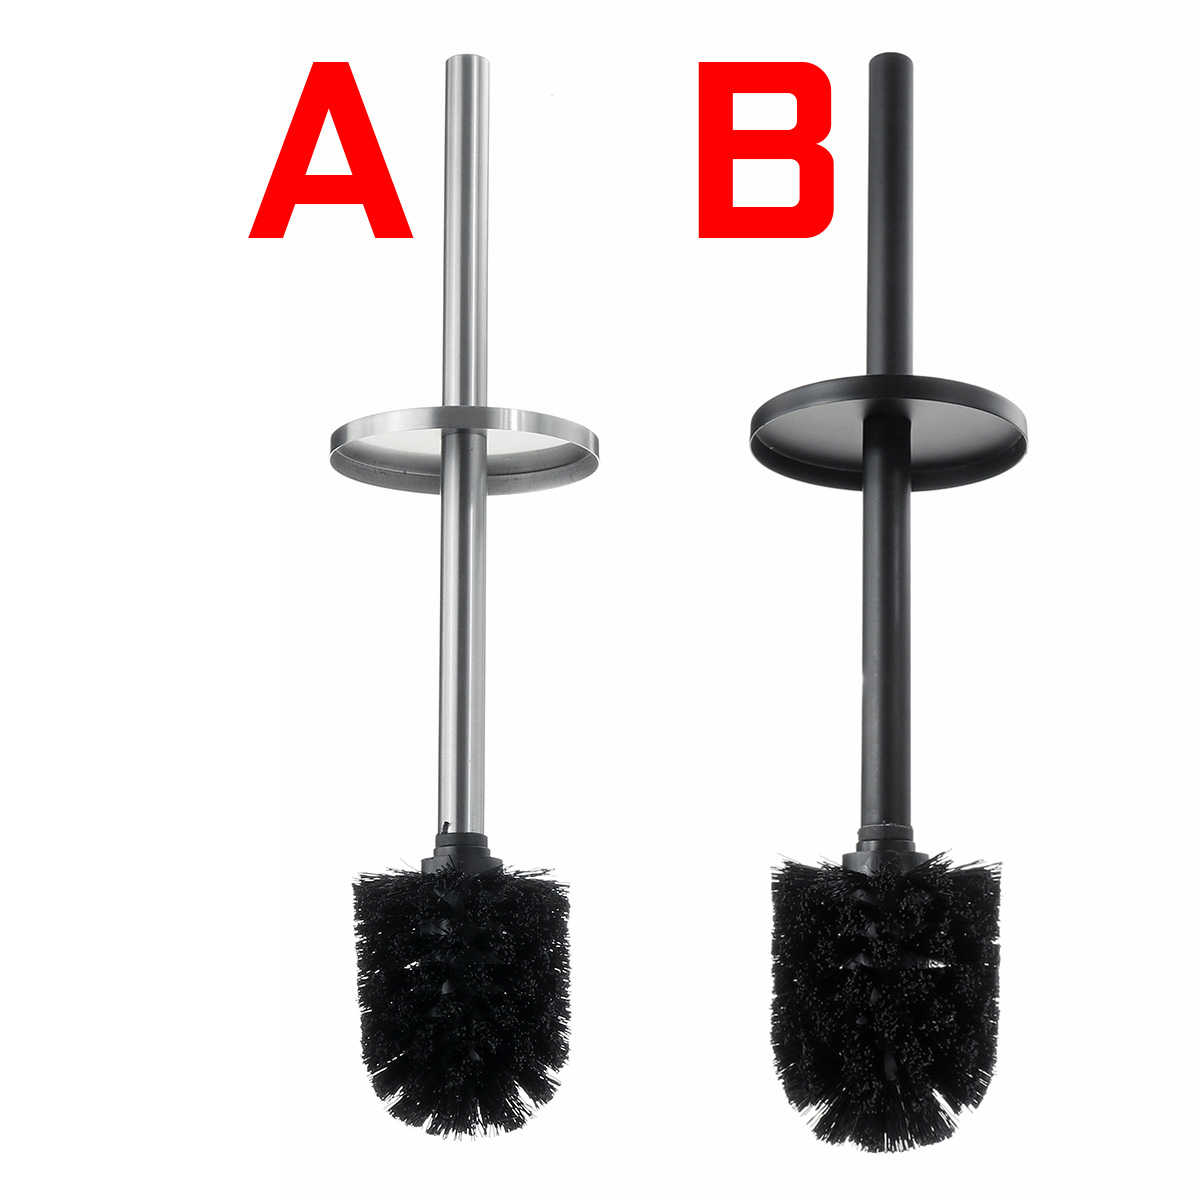 Toilet-Cleaning-Brushes-Wall-mounted-Stainless-Steel-Handle-Toilet-Bathroom-Easy-install-1600807-2